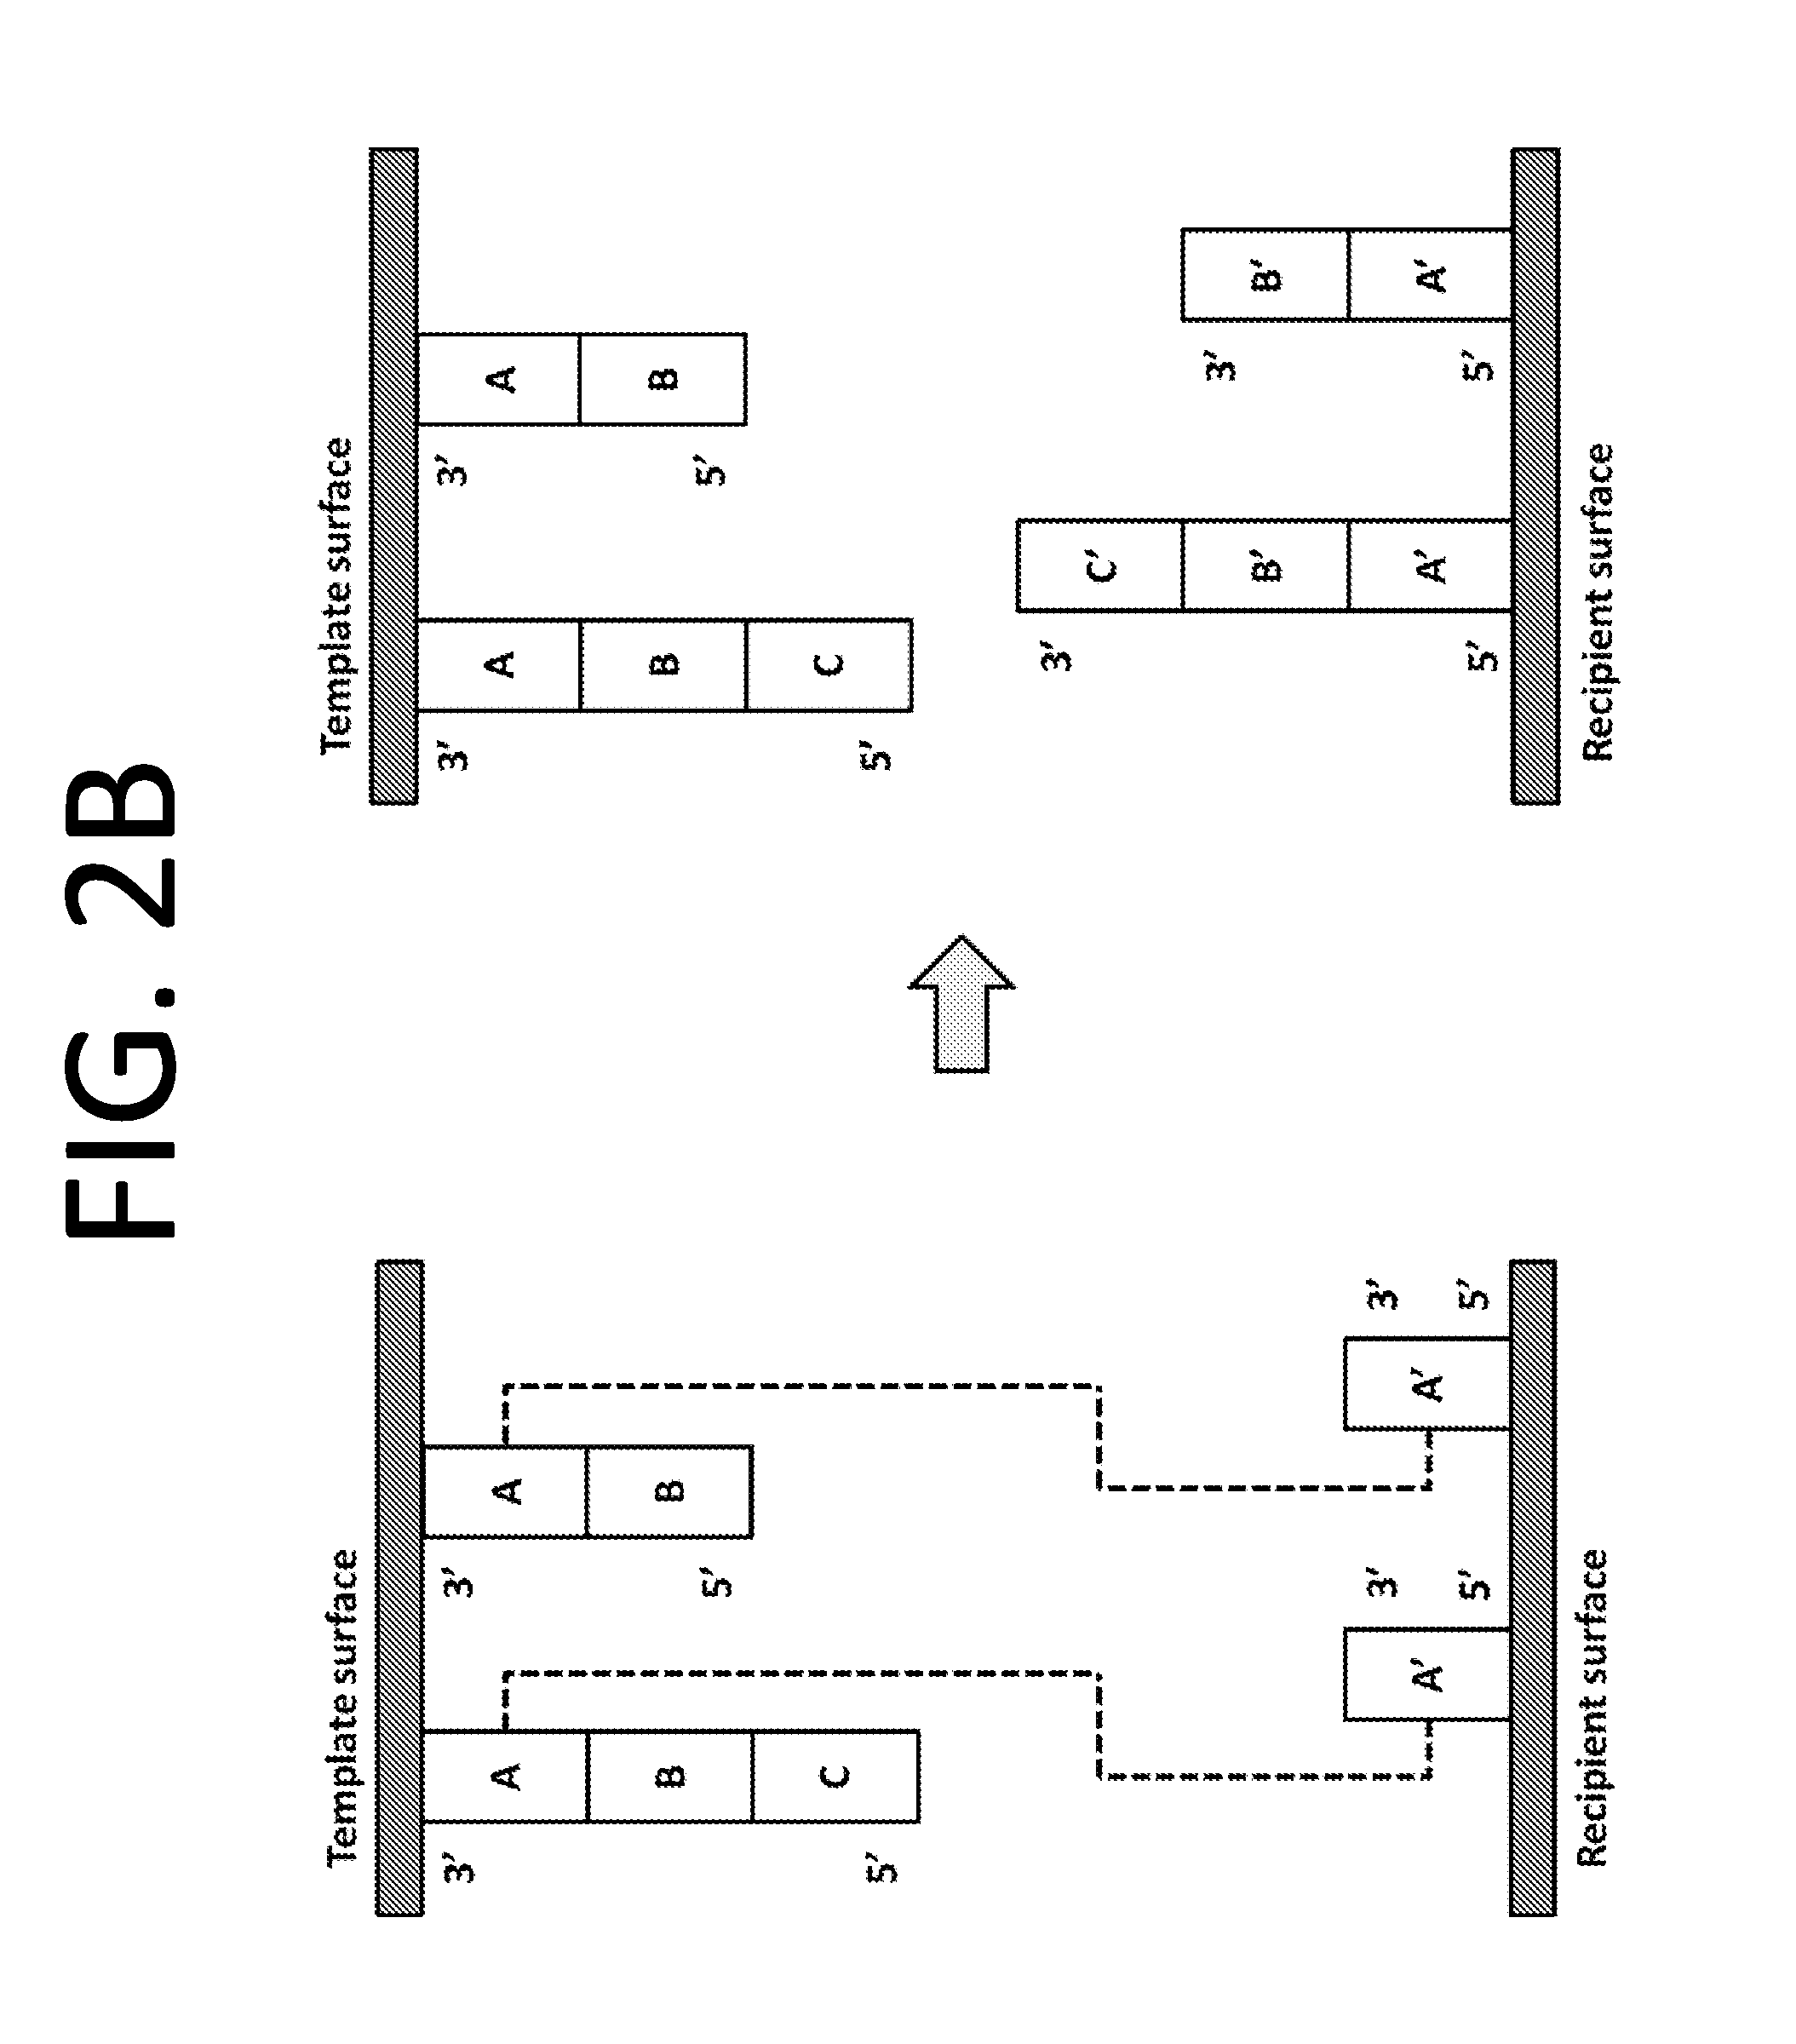 Fabrication of patterned arrays